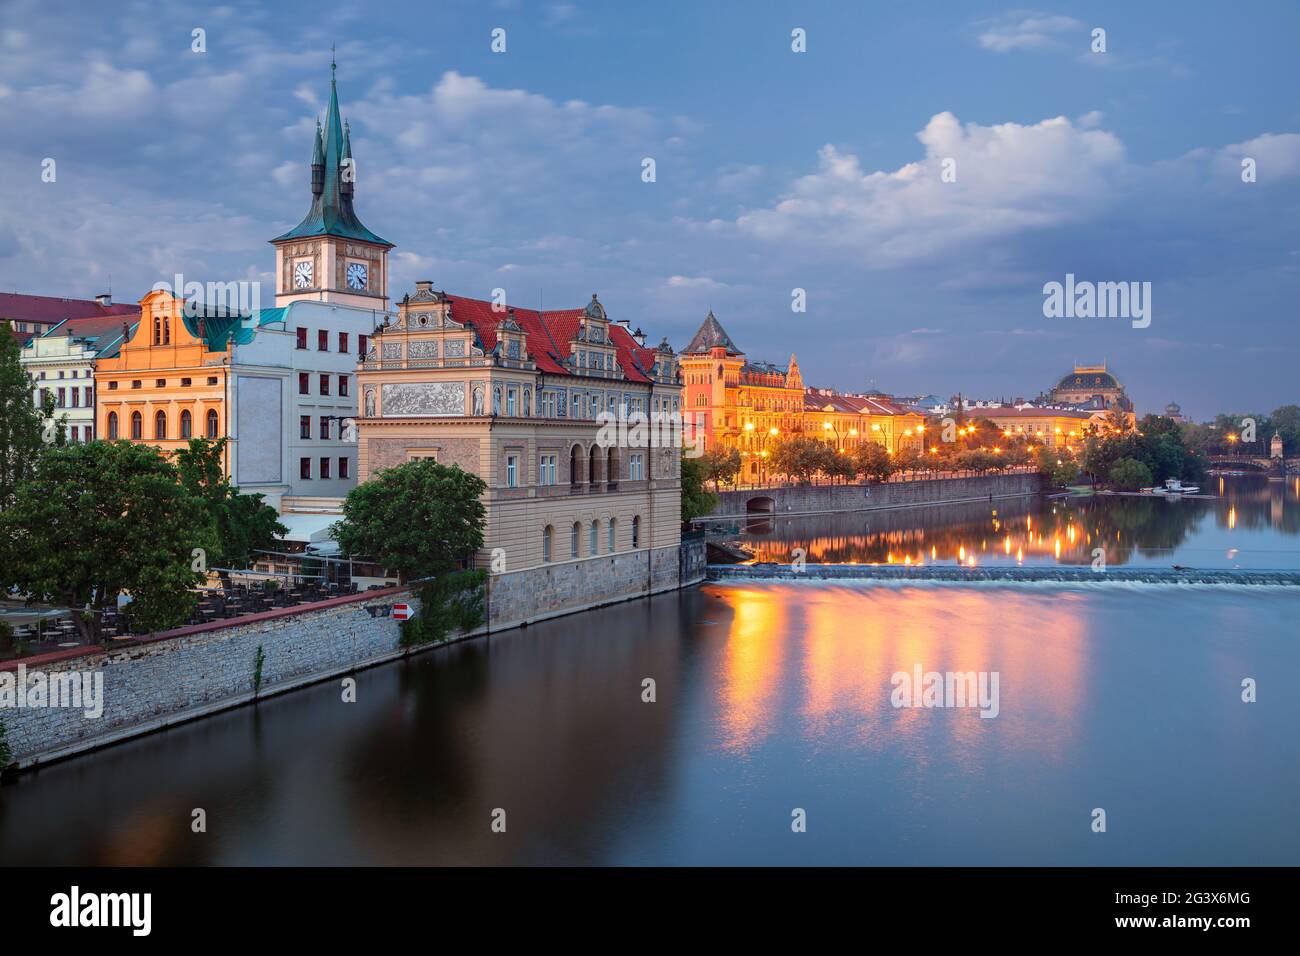 Prague Riverside. Cityscape image of Prague riverside with Old Town Water Tower at twilight blue hour. Stock Photo